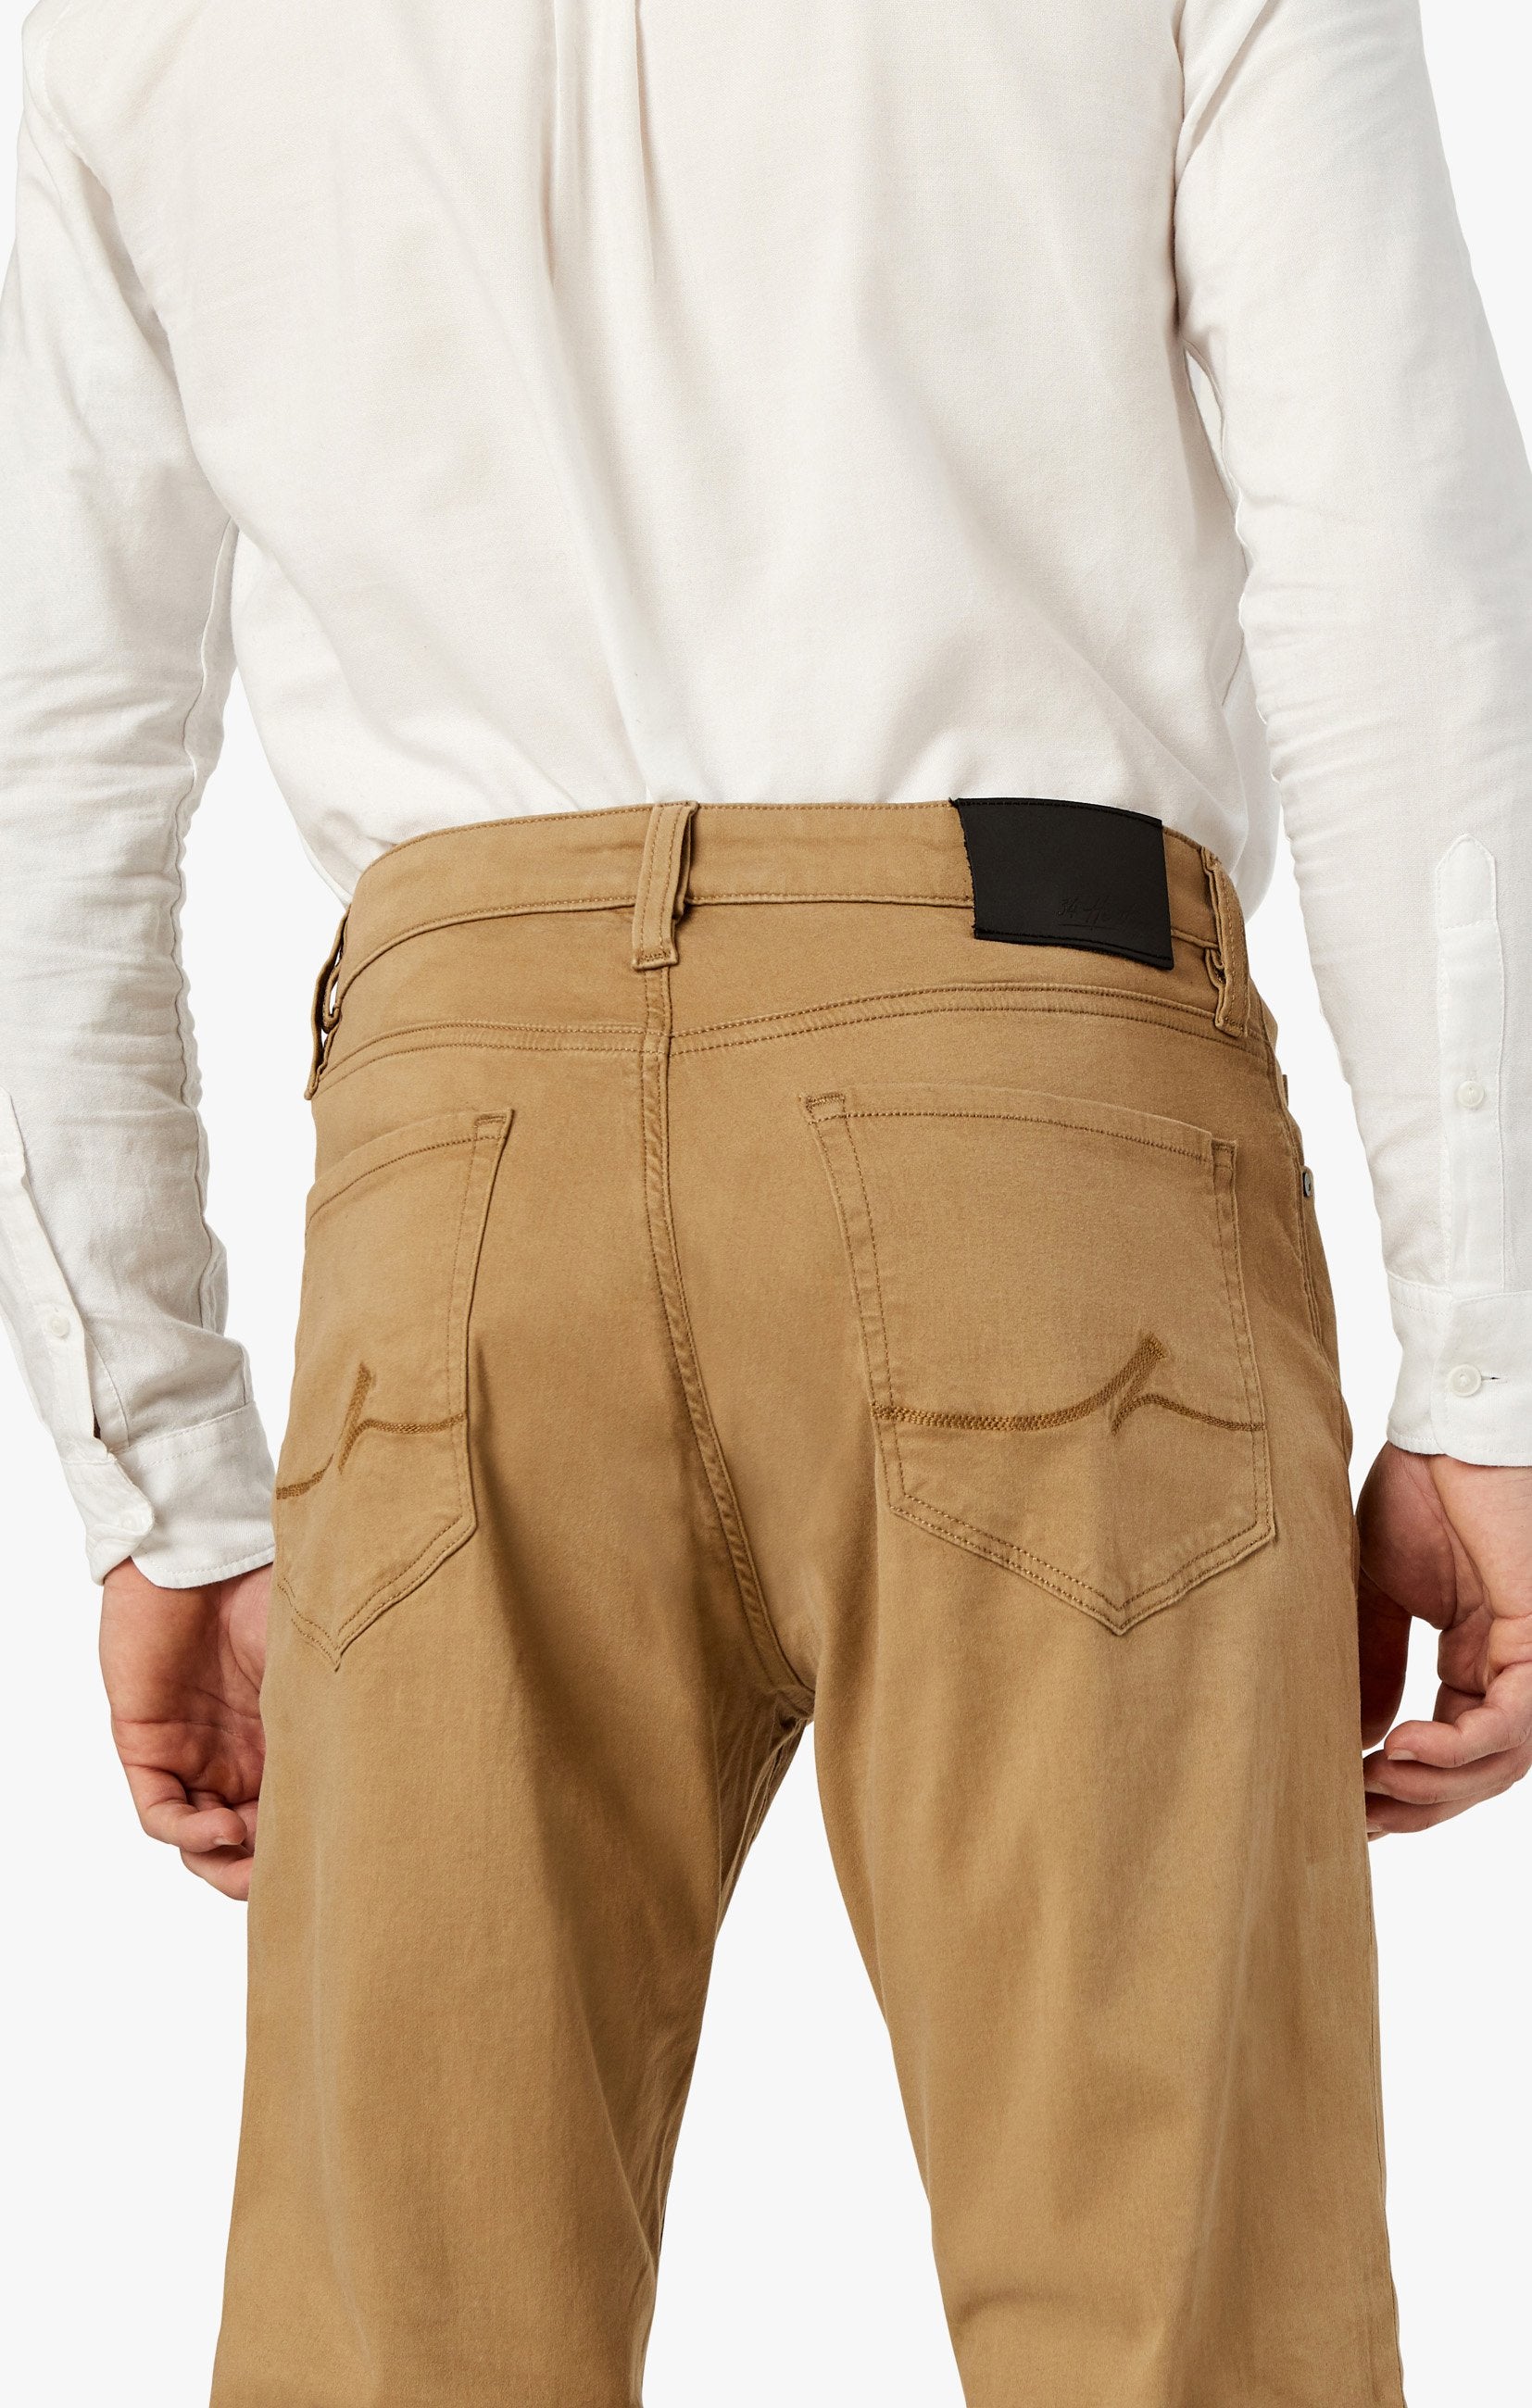 Charisma Relaxed Straight Pants In Khaki Twill Image 7